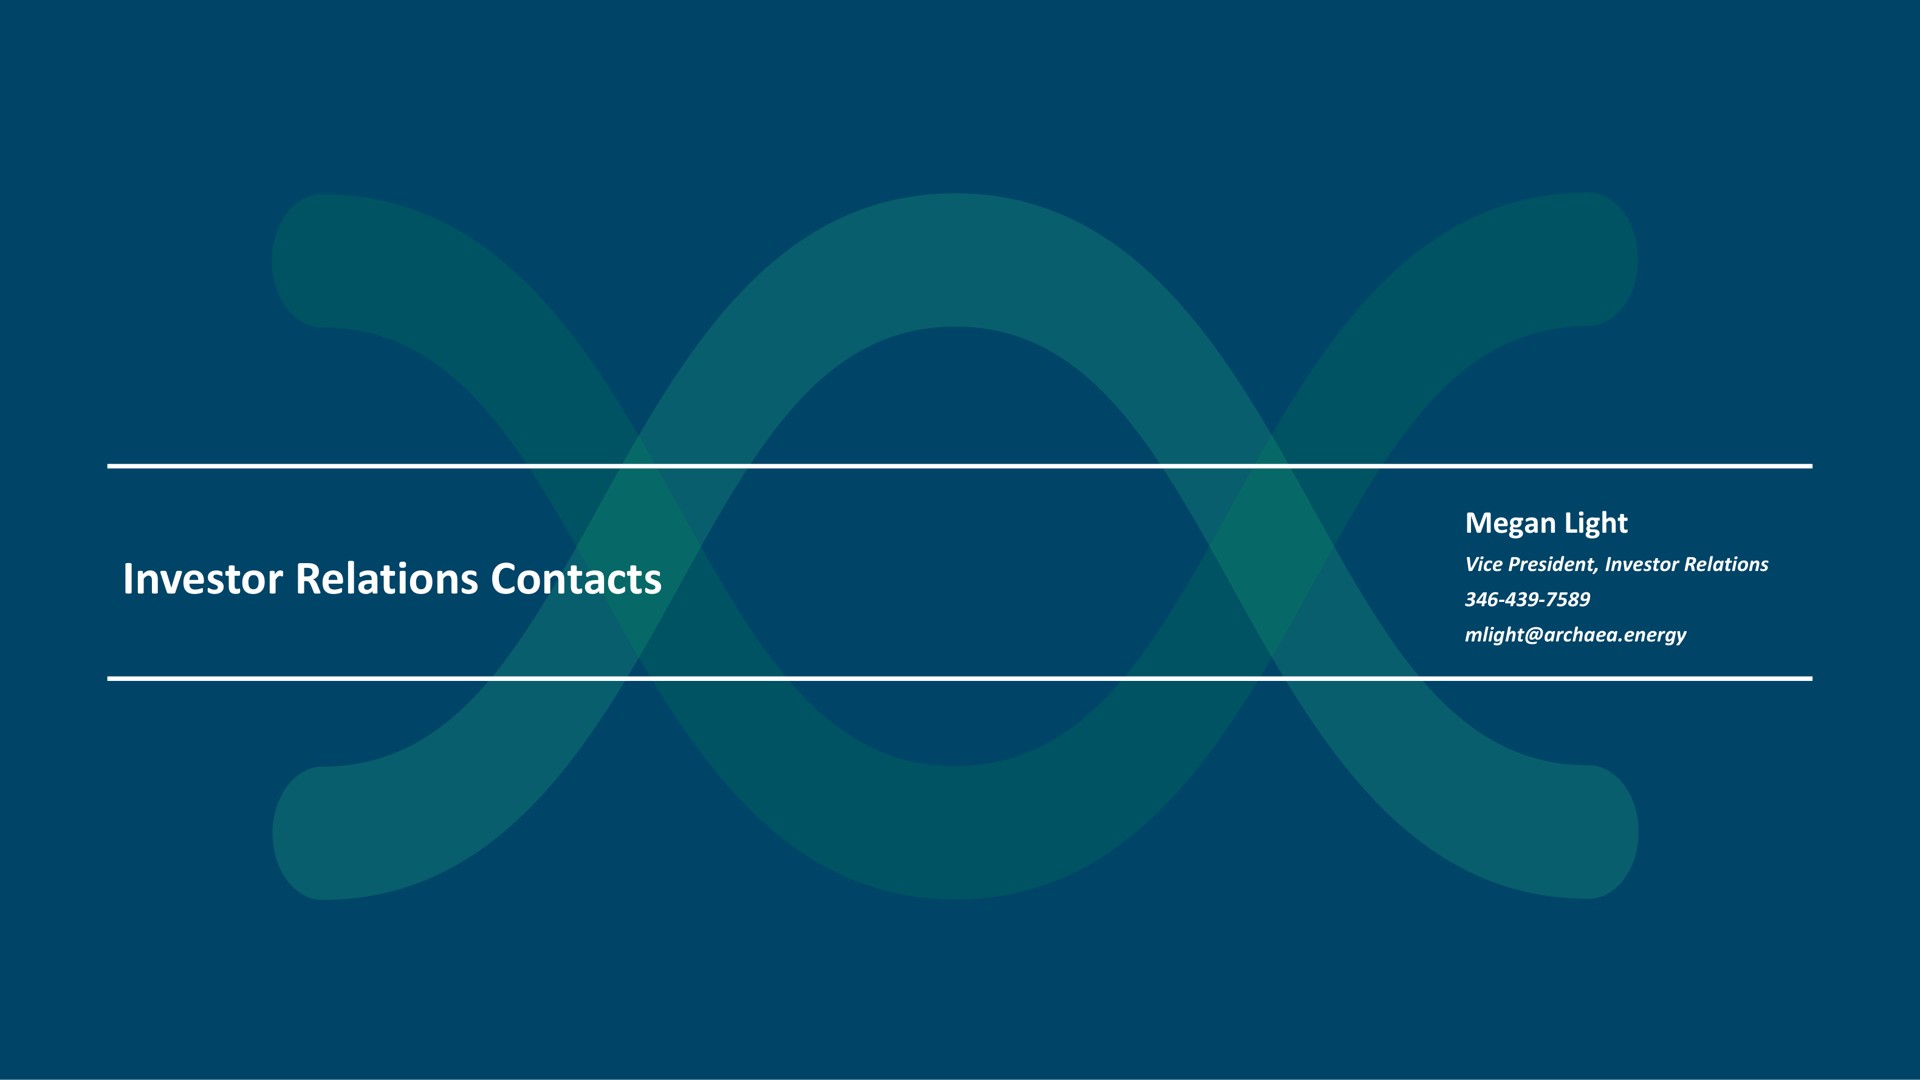 investor relations contacts | Archaea Energy